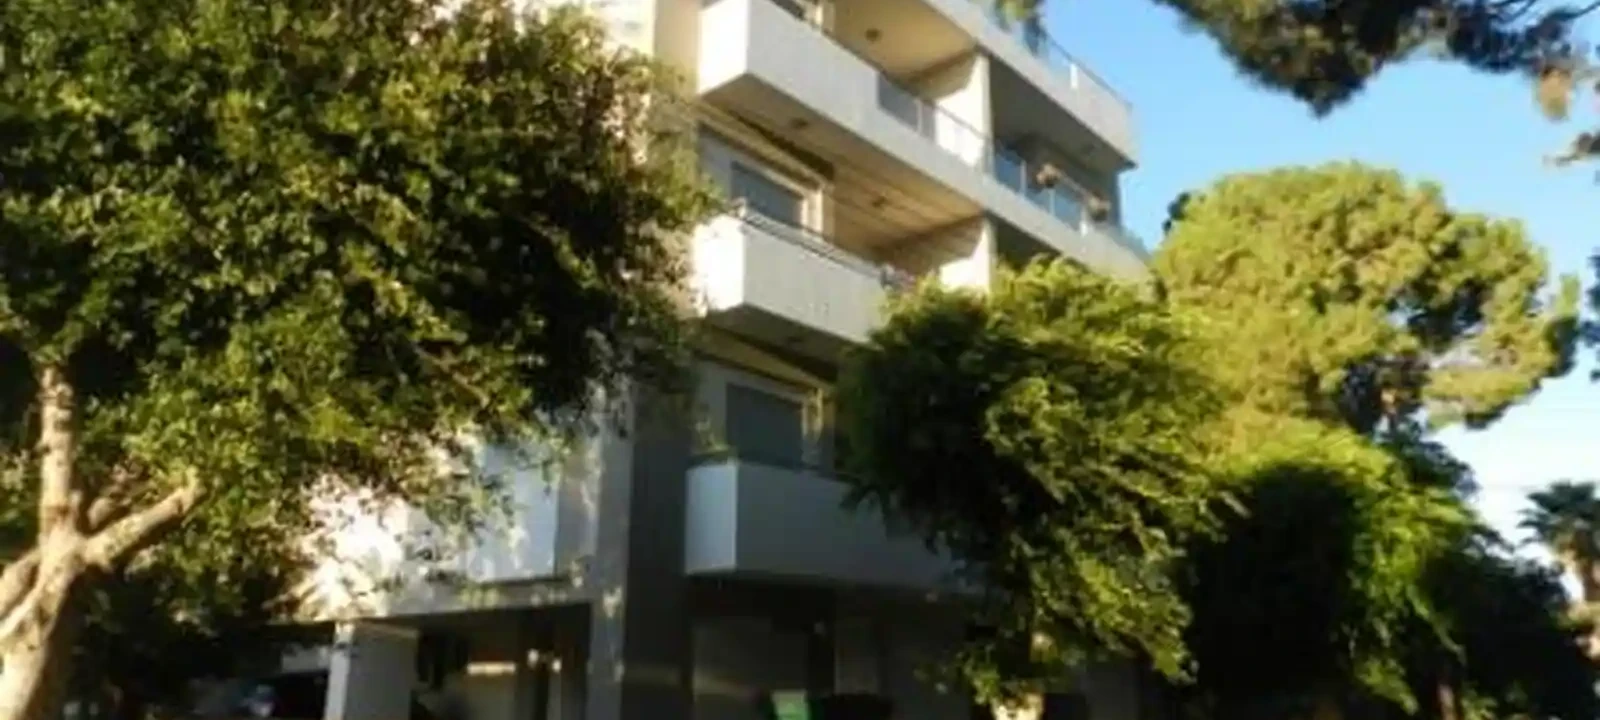 1-bedroom apartment to rent €1.100, image 1